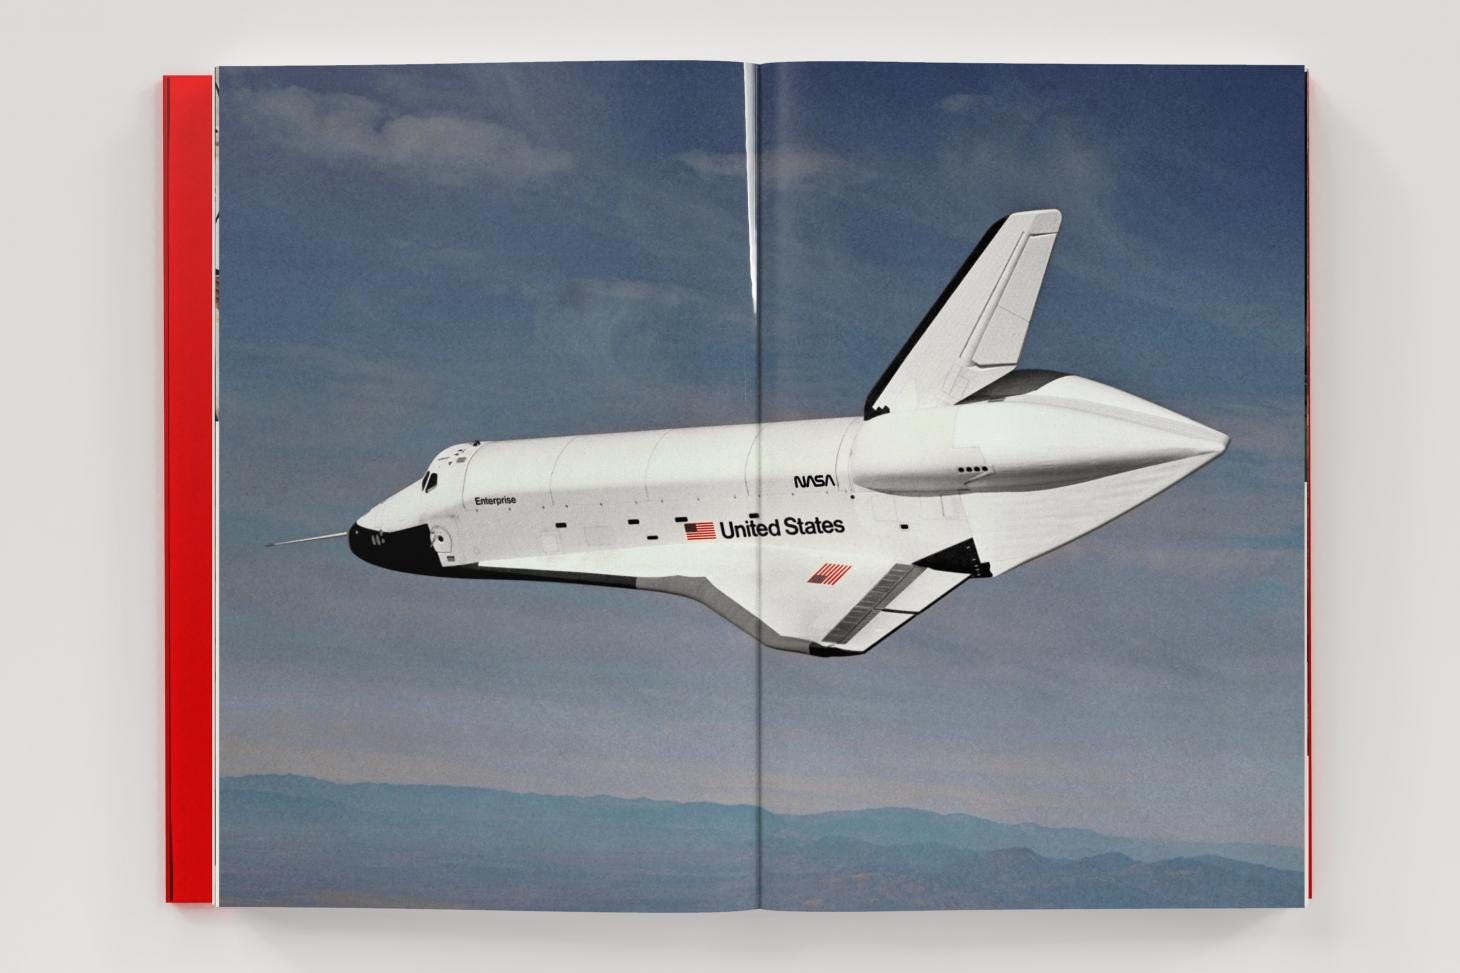 Space out: a history of NASA’s graphic design.